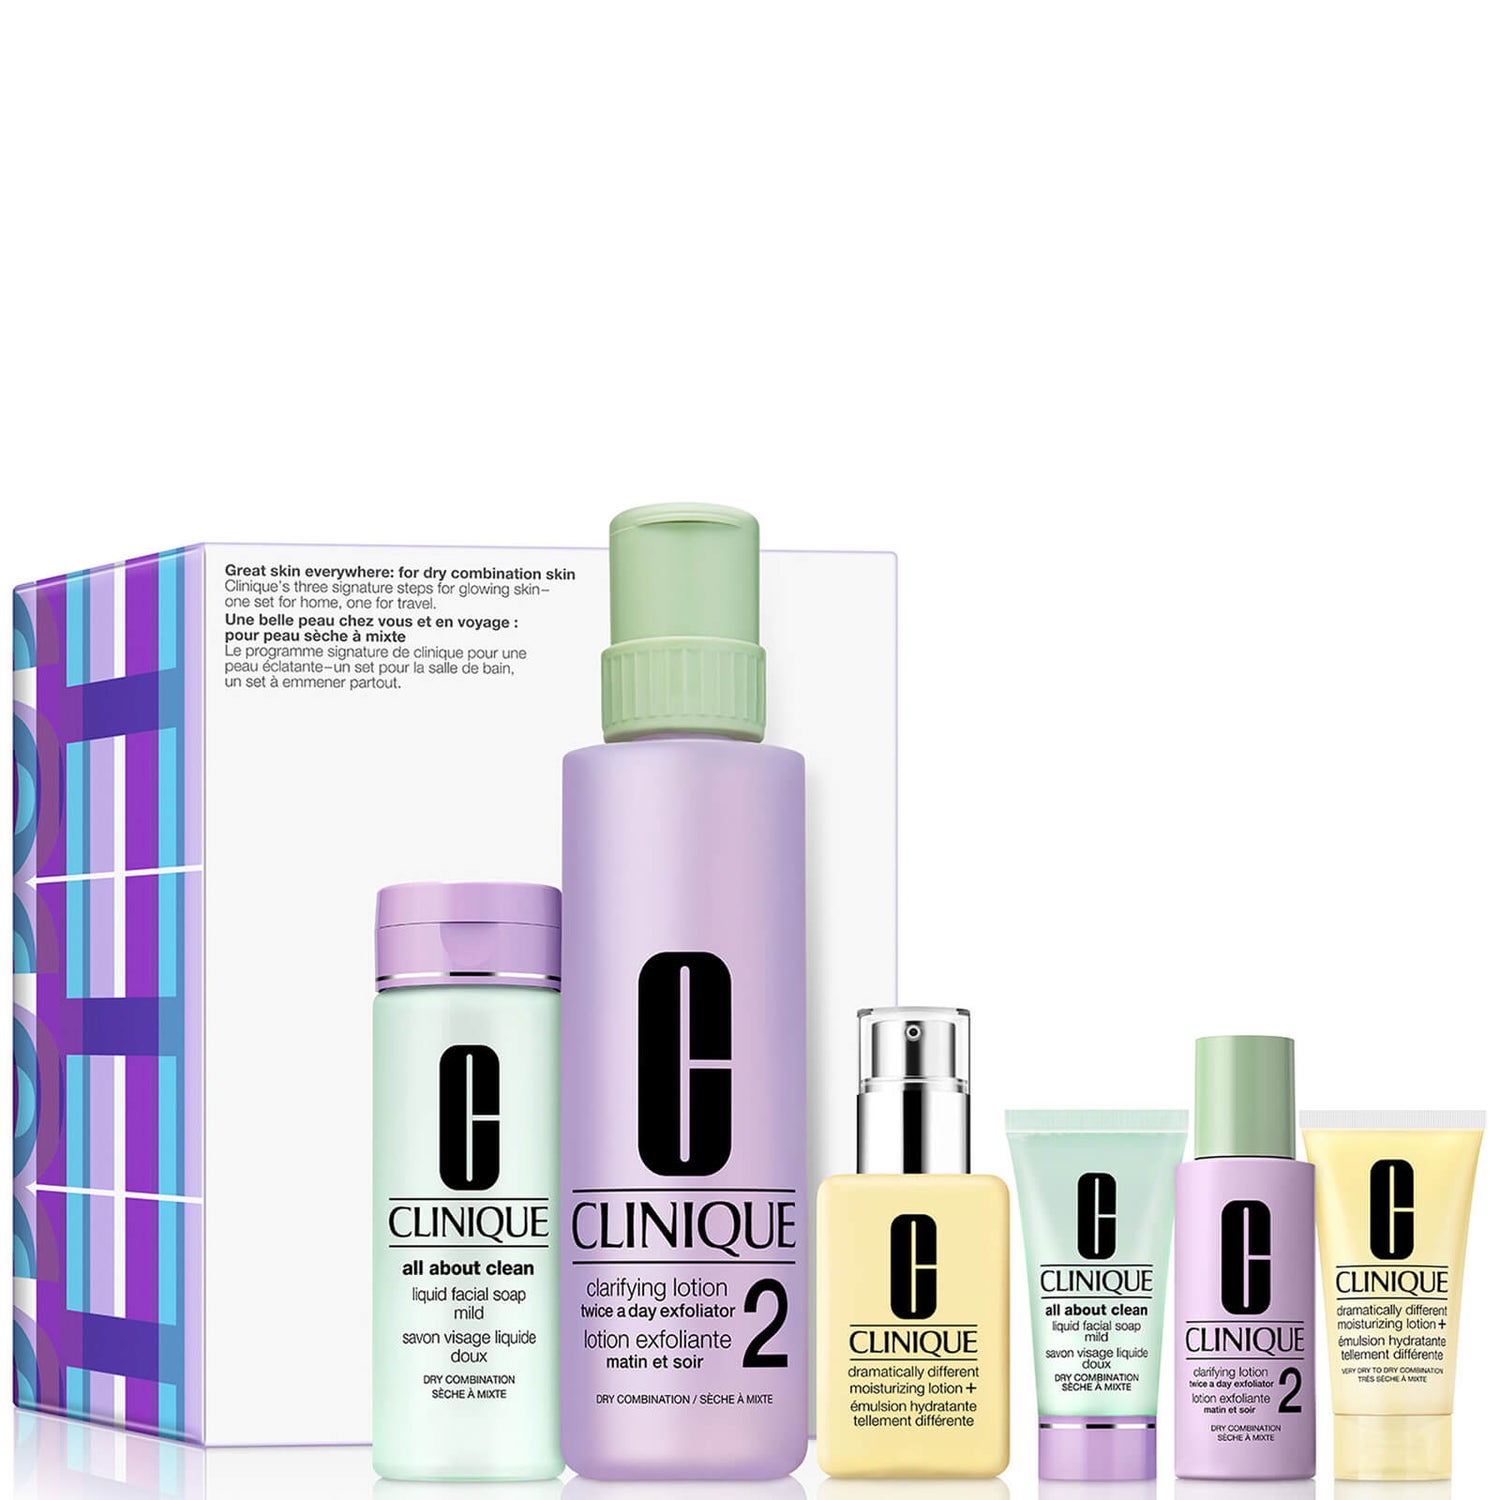 Clinique Great Skin Everywhere Skincare Set for Dry Combination Skin (Worth £110)